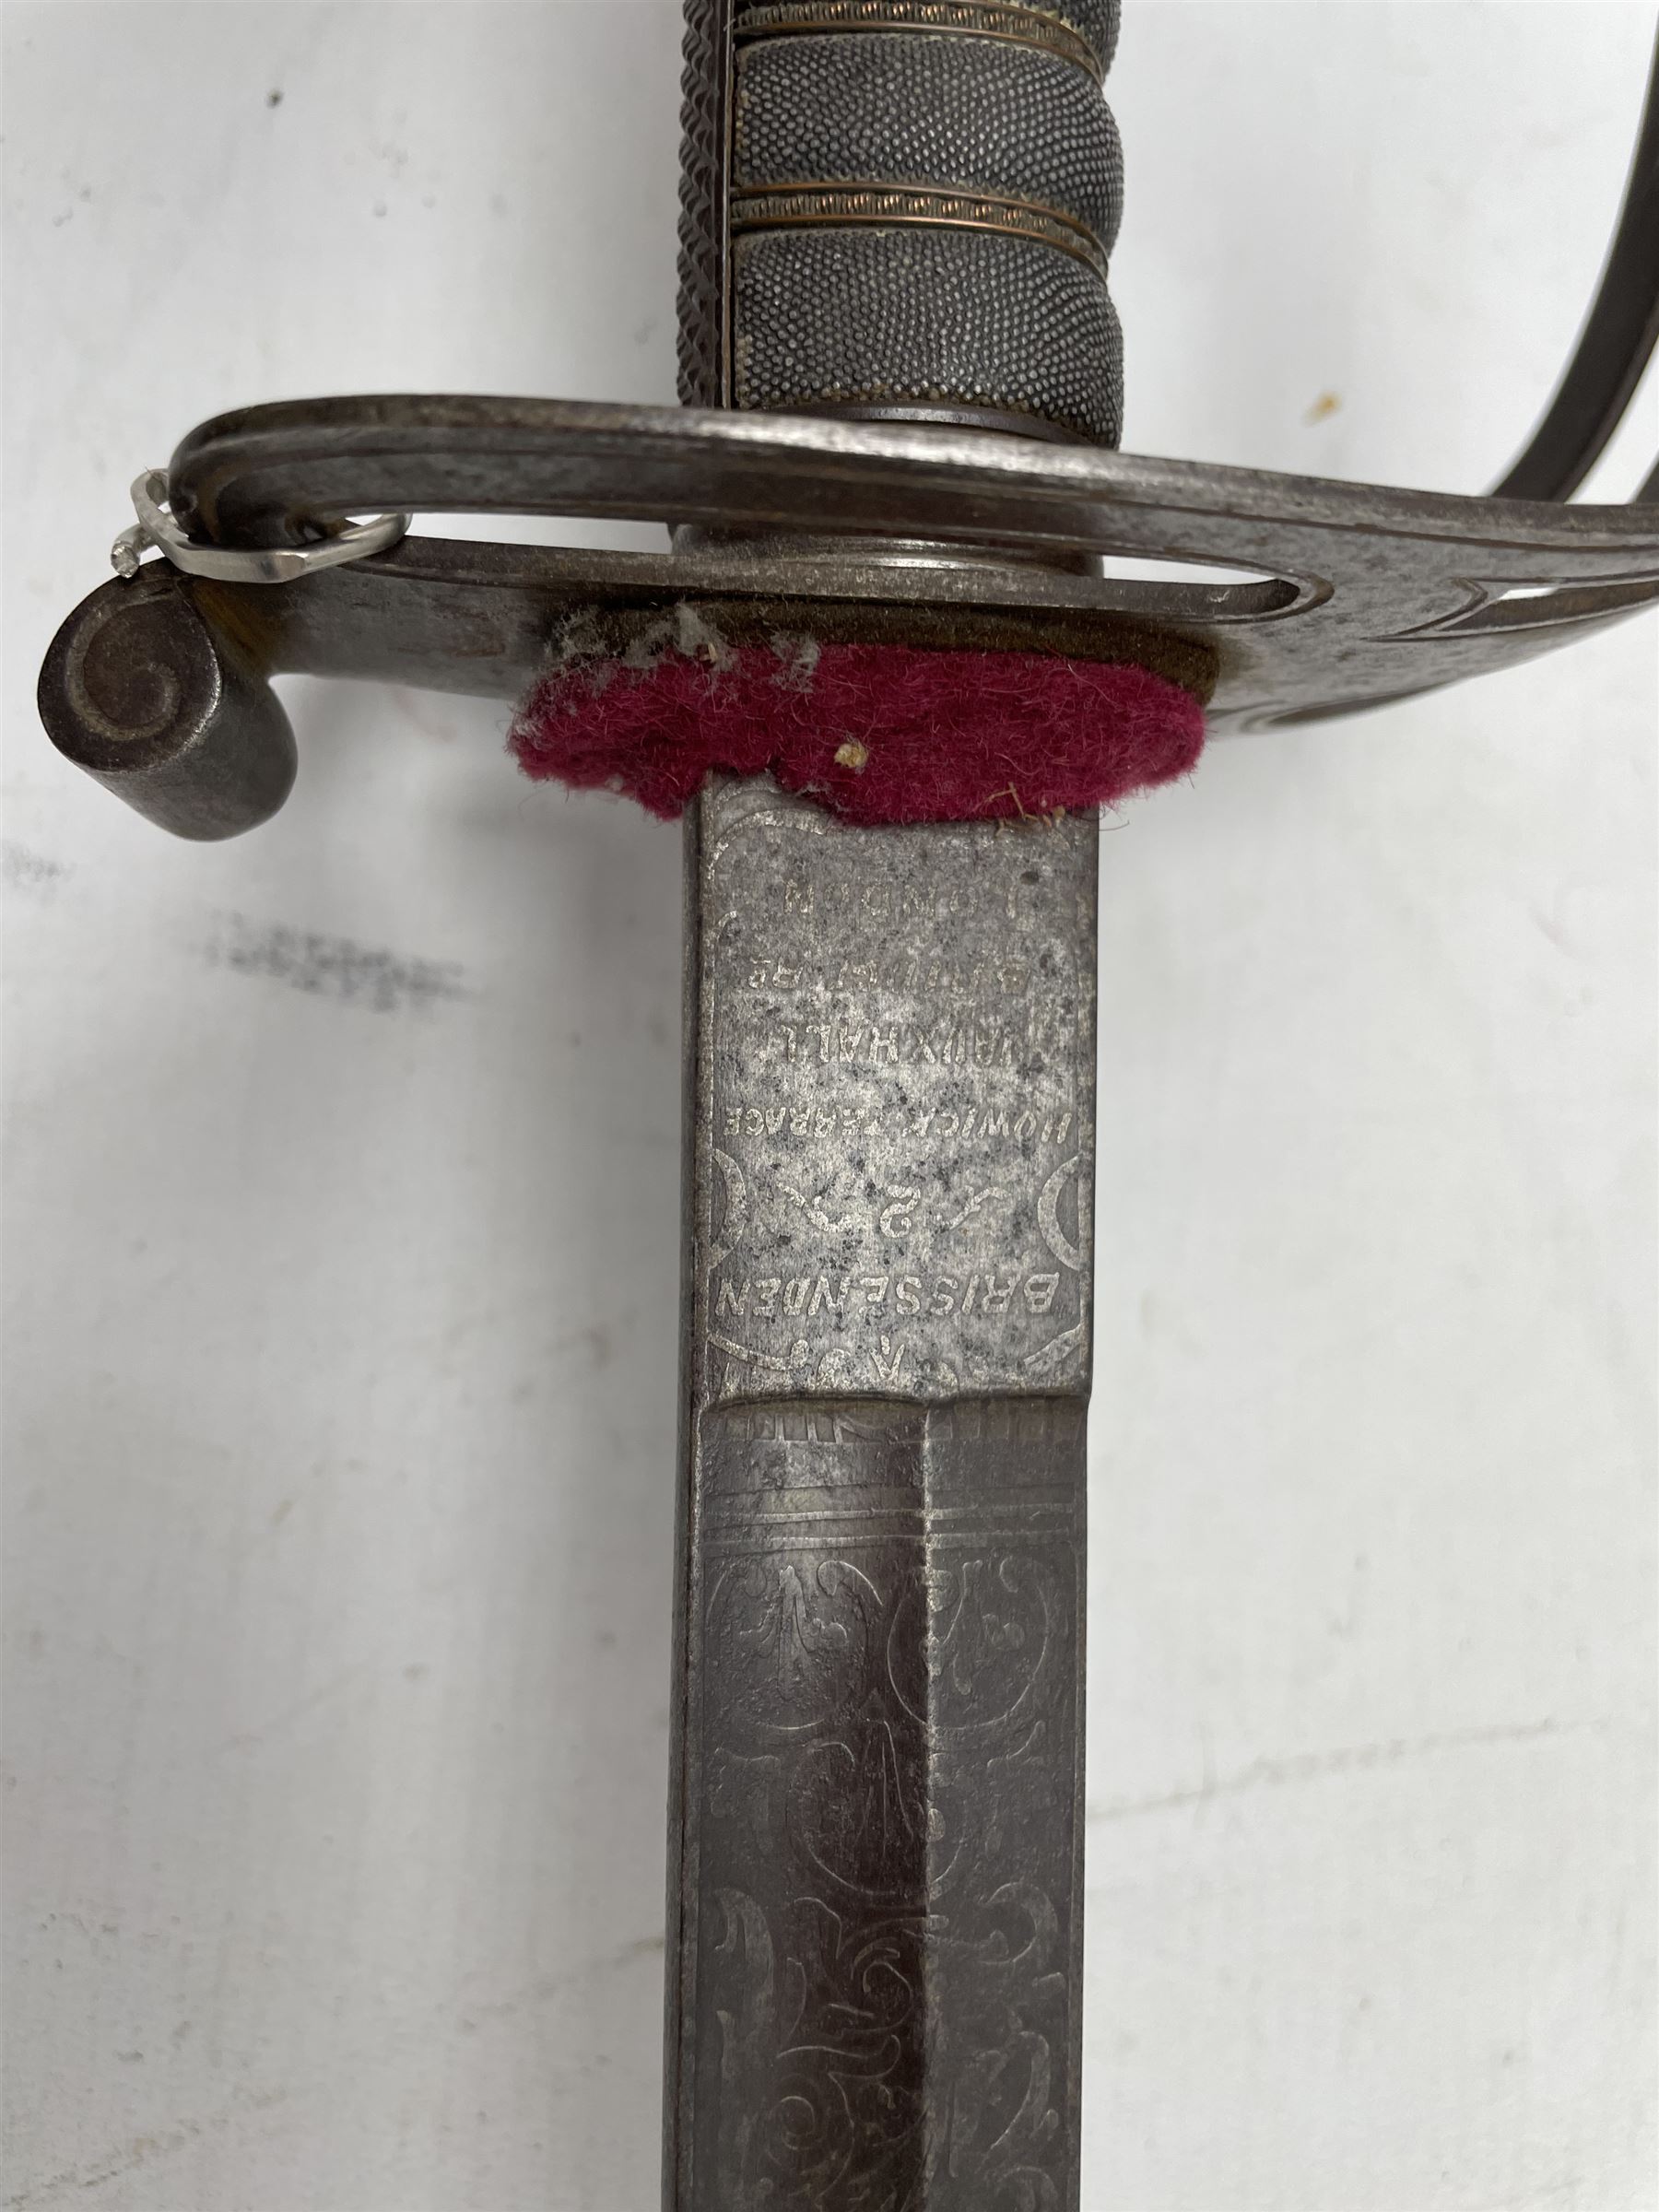 Victorian Queens Westminster Rifles officers sword with engraved blade inscribed 'Brissenden - Image 5 of 5